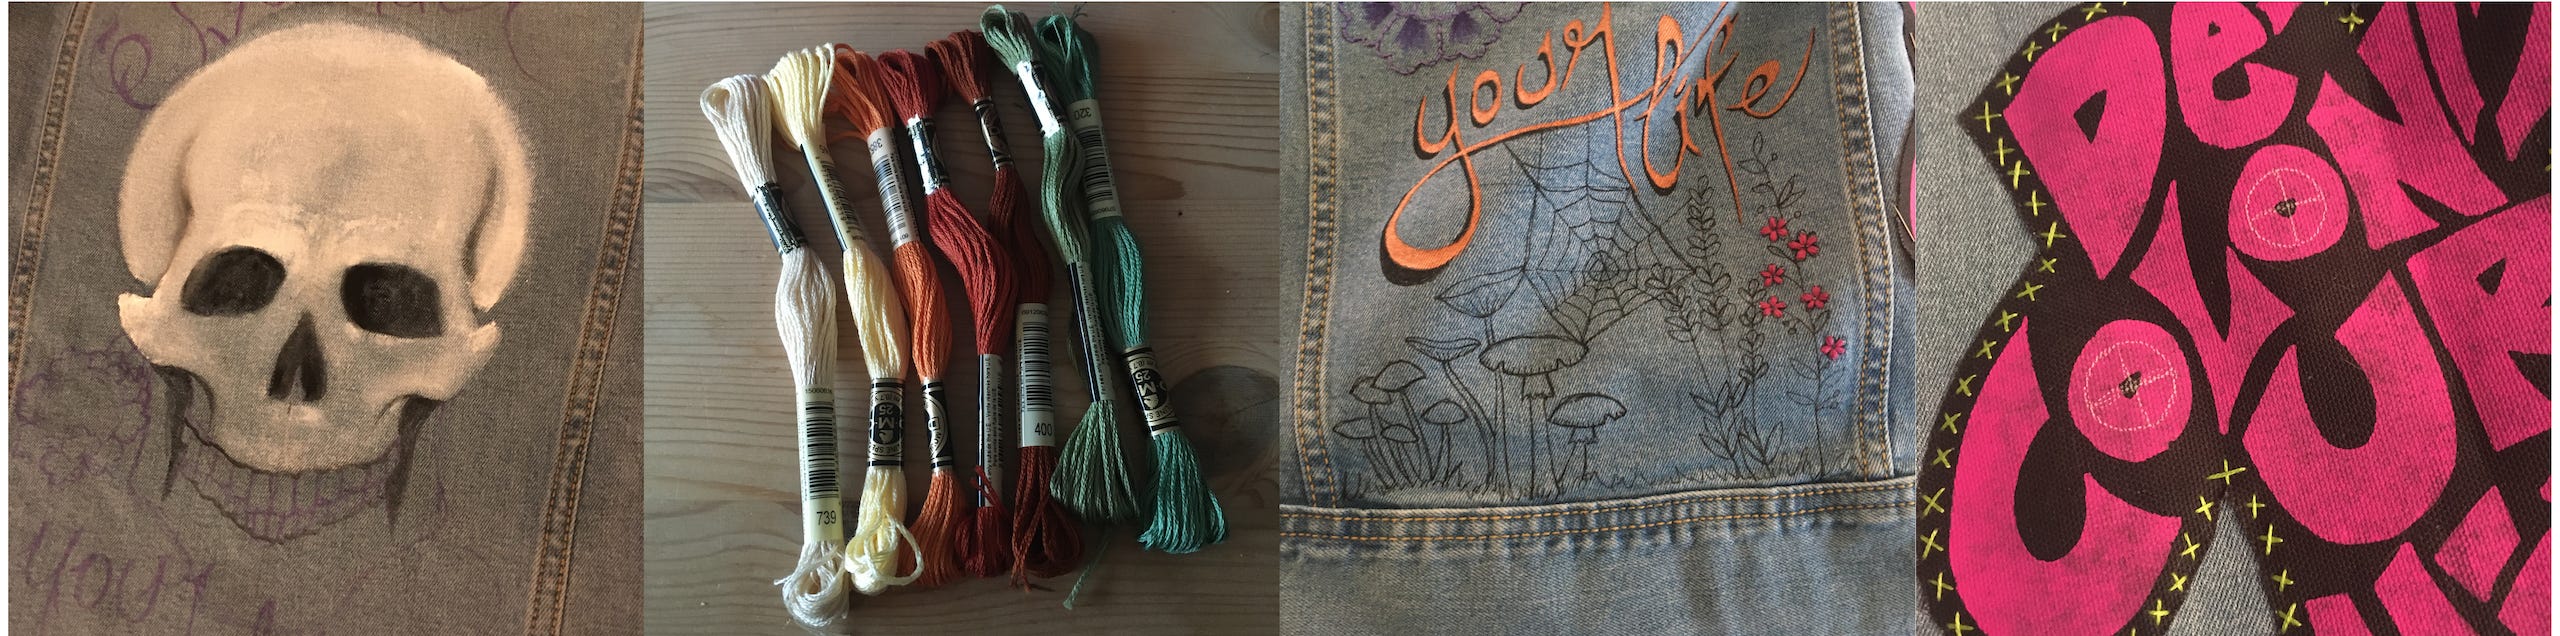 A spread of four square images. On the far left is a partially painted skull on a denim vest. The next image over is of a selection of earth-tine embroidery threads. The photo next to that is of a sketched out scene of mushrooms, flowers, and a spiderweb on the bottom of a denim vest, awaiting embroidery. The far right image is a close up of a patch with bright pink text on a black background. The edges of the patch are stitched with little green embroidery Xs. The text showing most predominantly reads: De Colonize Ur... The O's in 'Colonize' have little white circles sketched on them in preparation for embroidery flowers. 